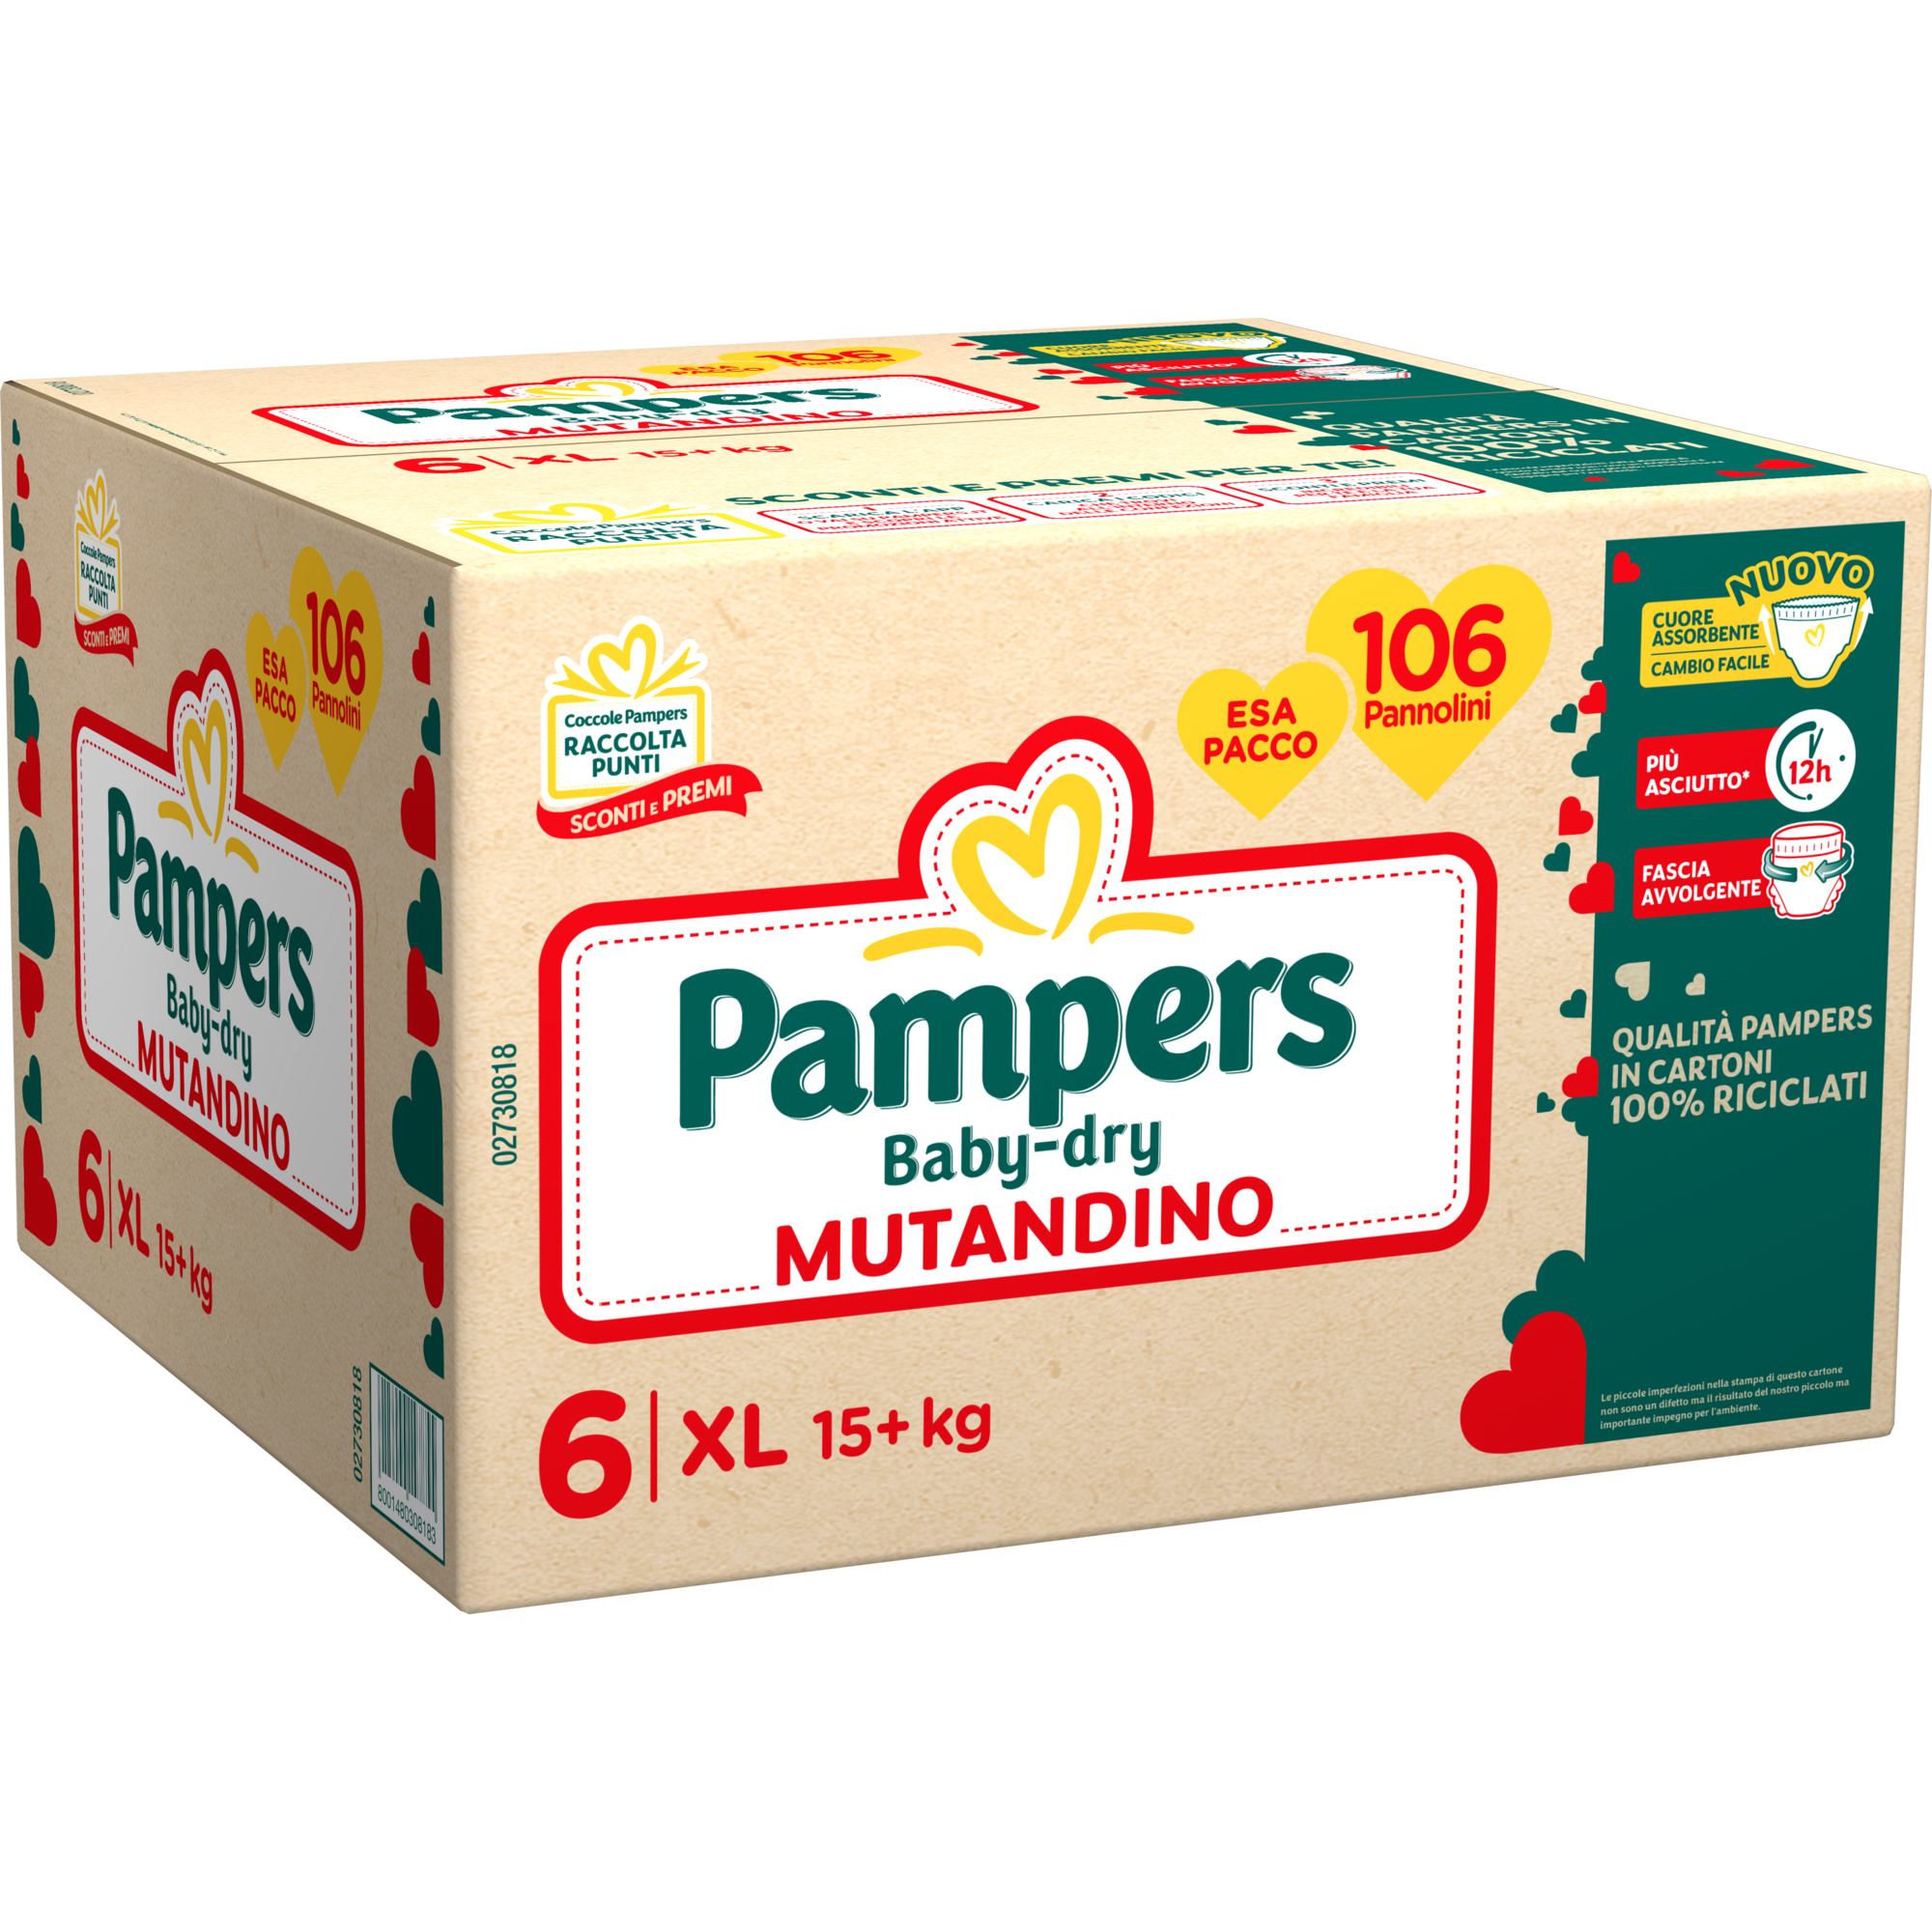 Pampers - esa pack babydry mutandino xl 106 pz - Pampers